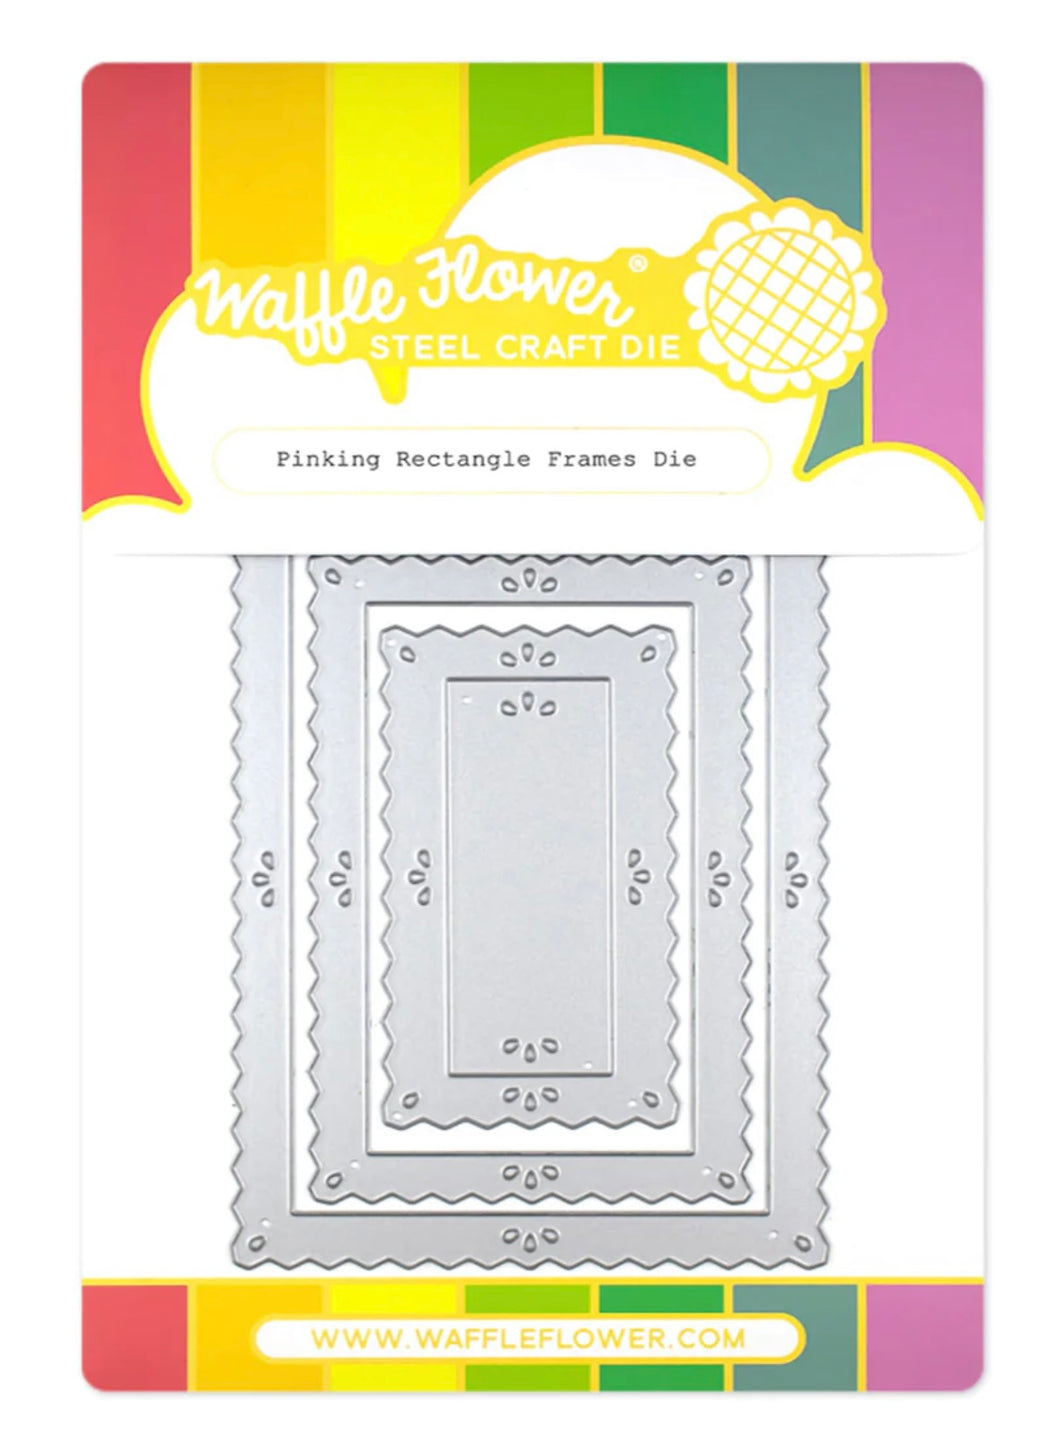 Waffle Flower - Pinking Rectangle Frames Die